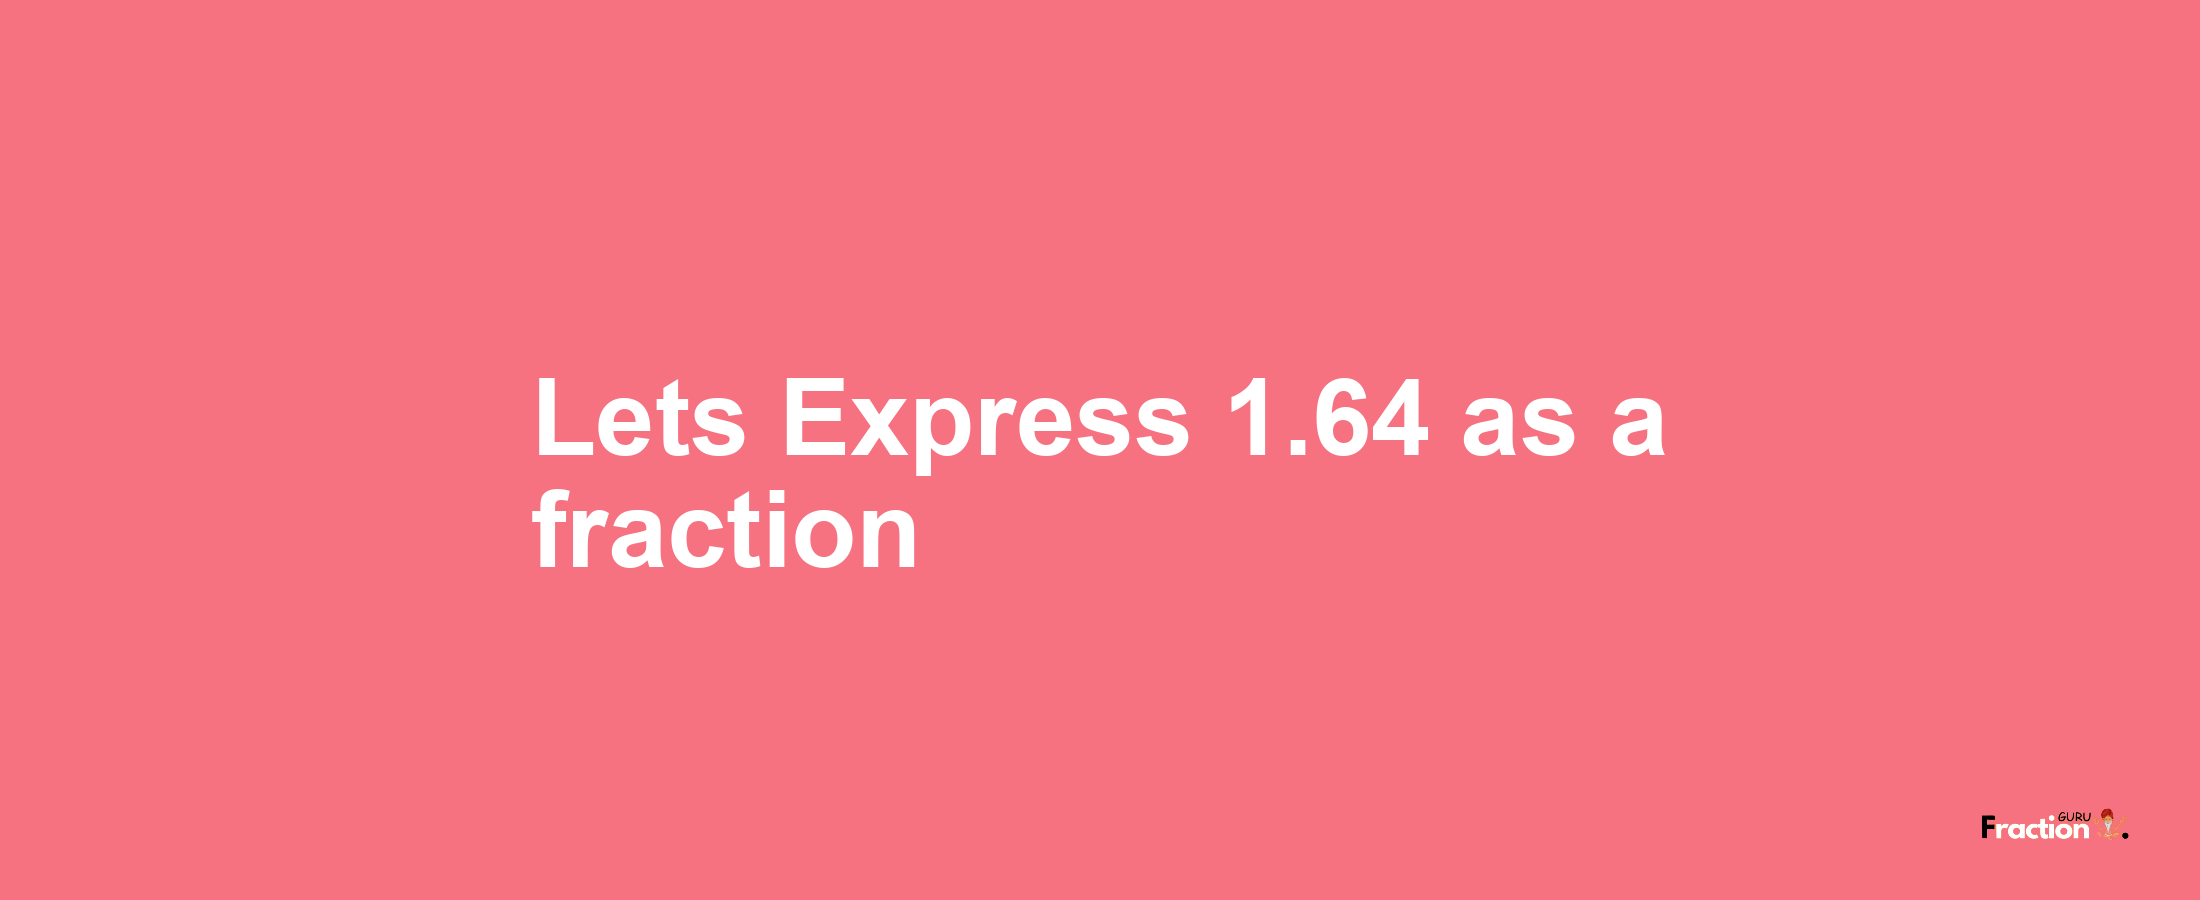 Lets Express 1.64 as afraction